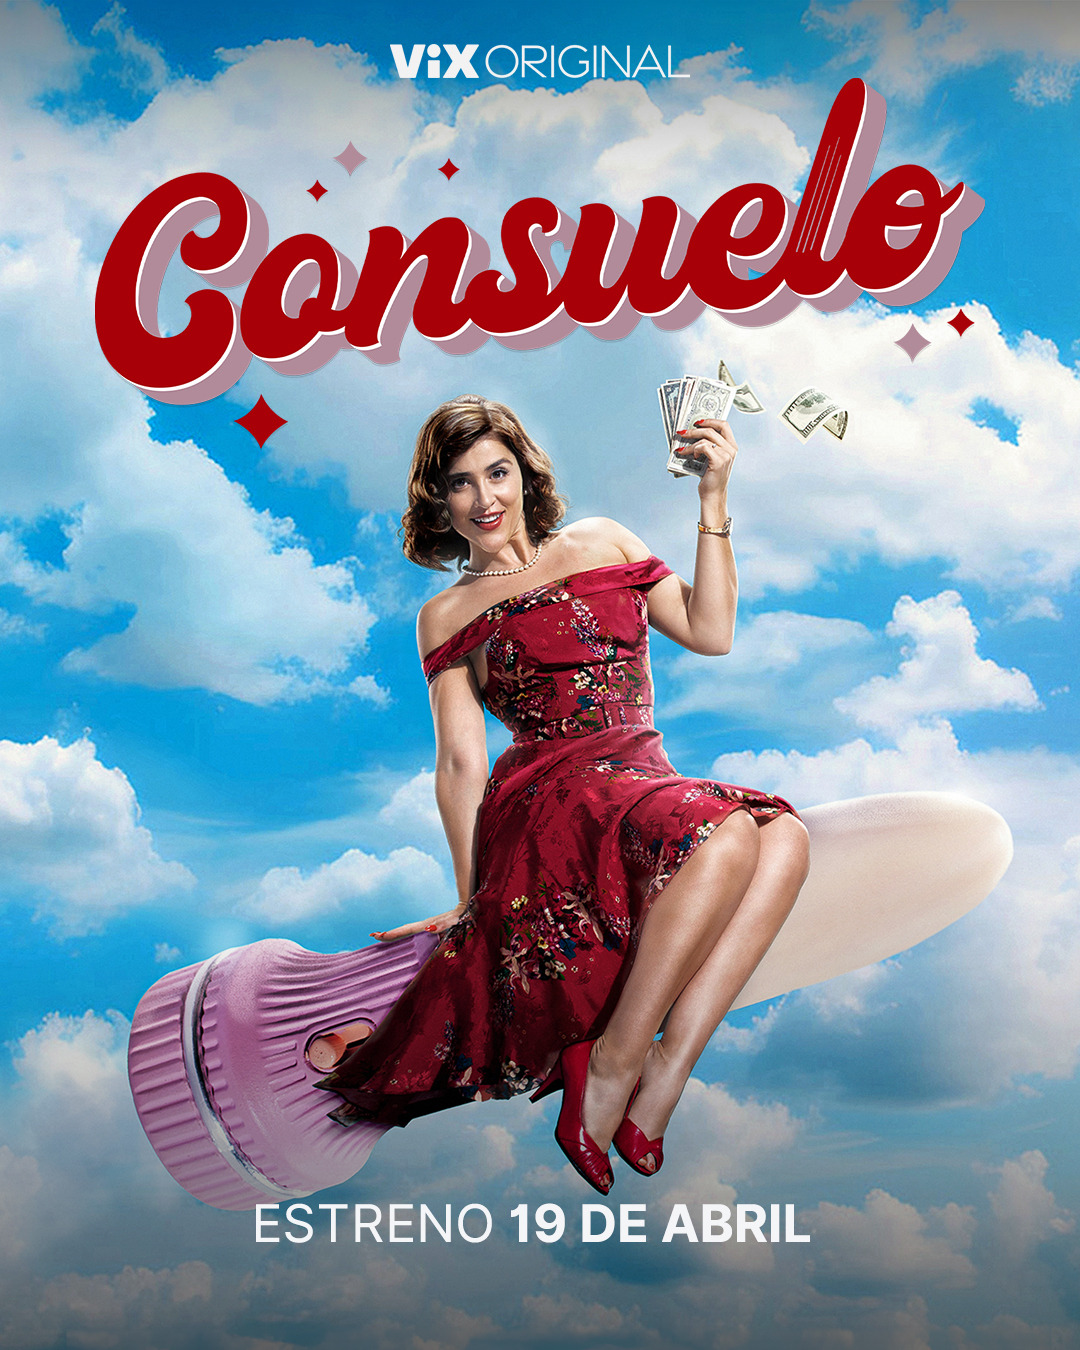 Extra Large TV Poster Image for Consuelo (#2 of 2)